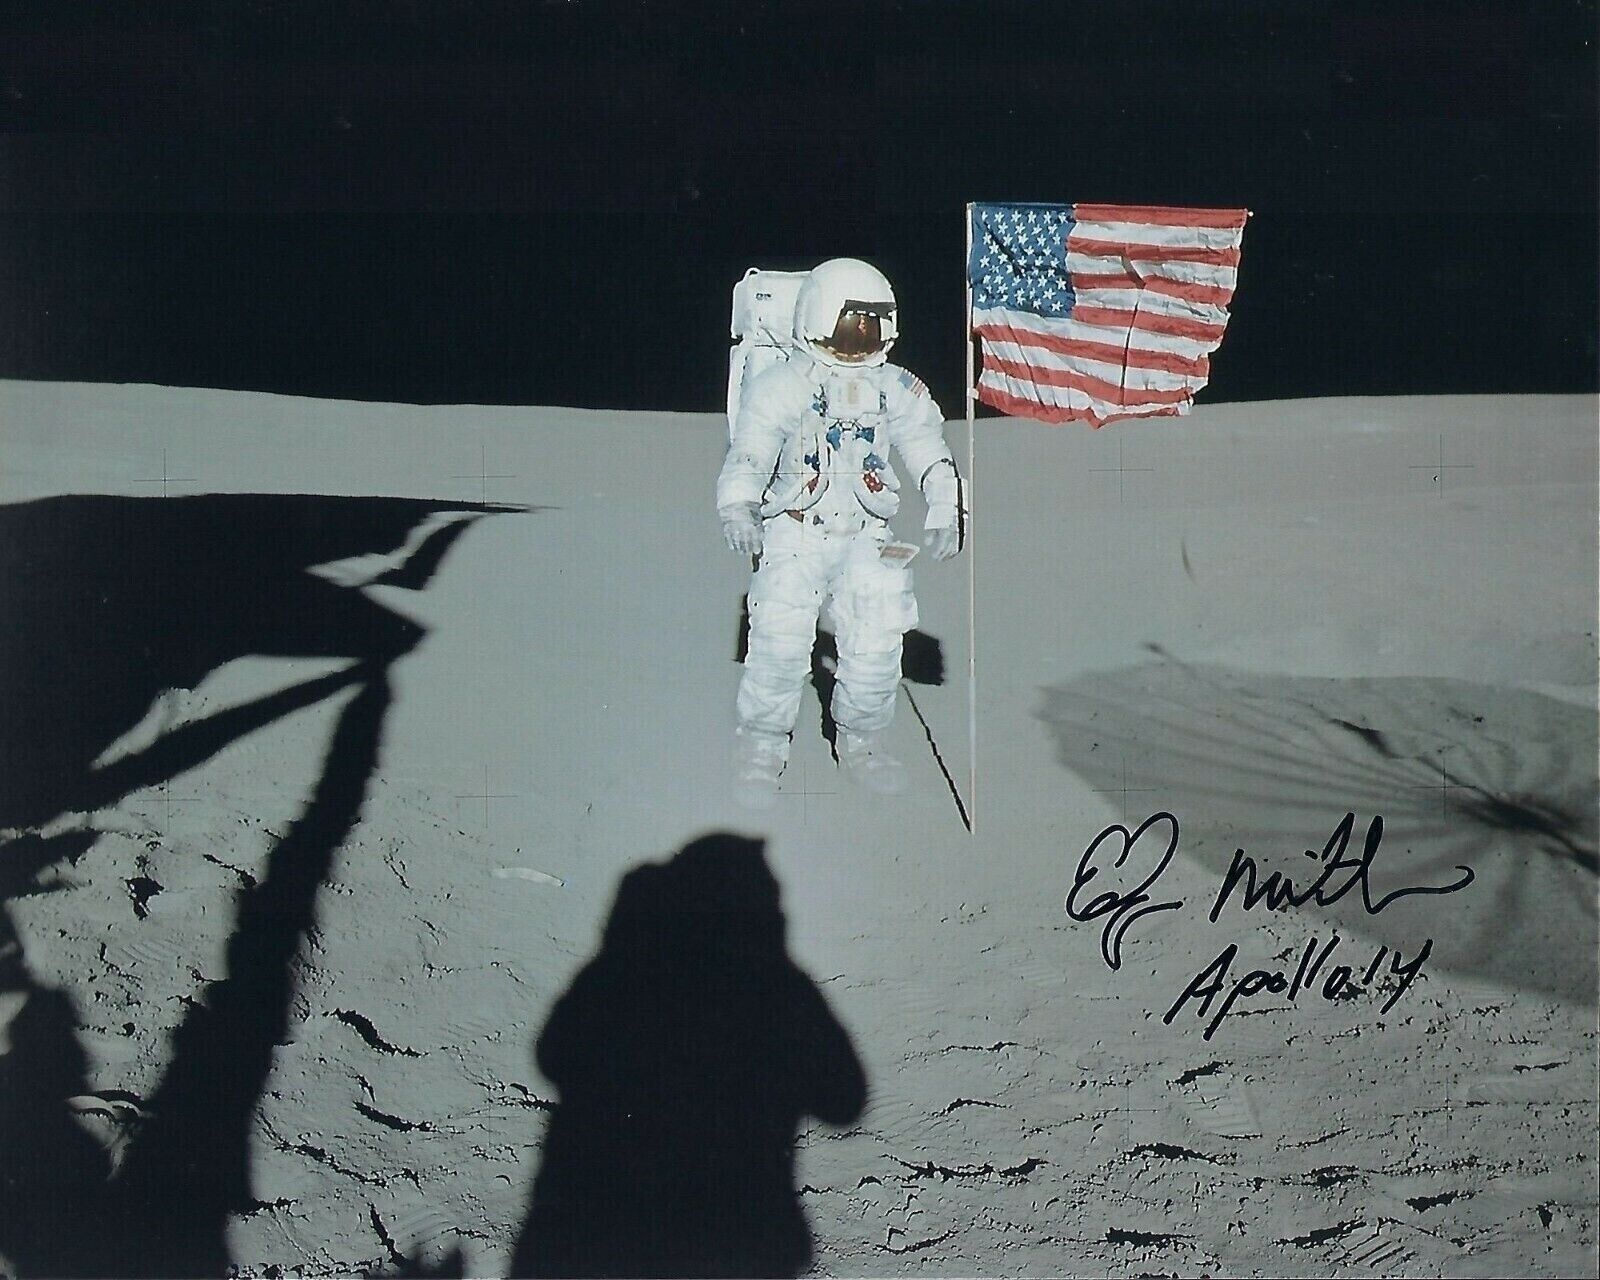 Edgar Mitchell Autographed Signed 8x10 Photo Poster painting ( Apollo 11 ) REPRINT